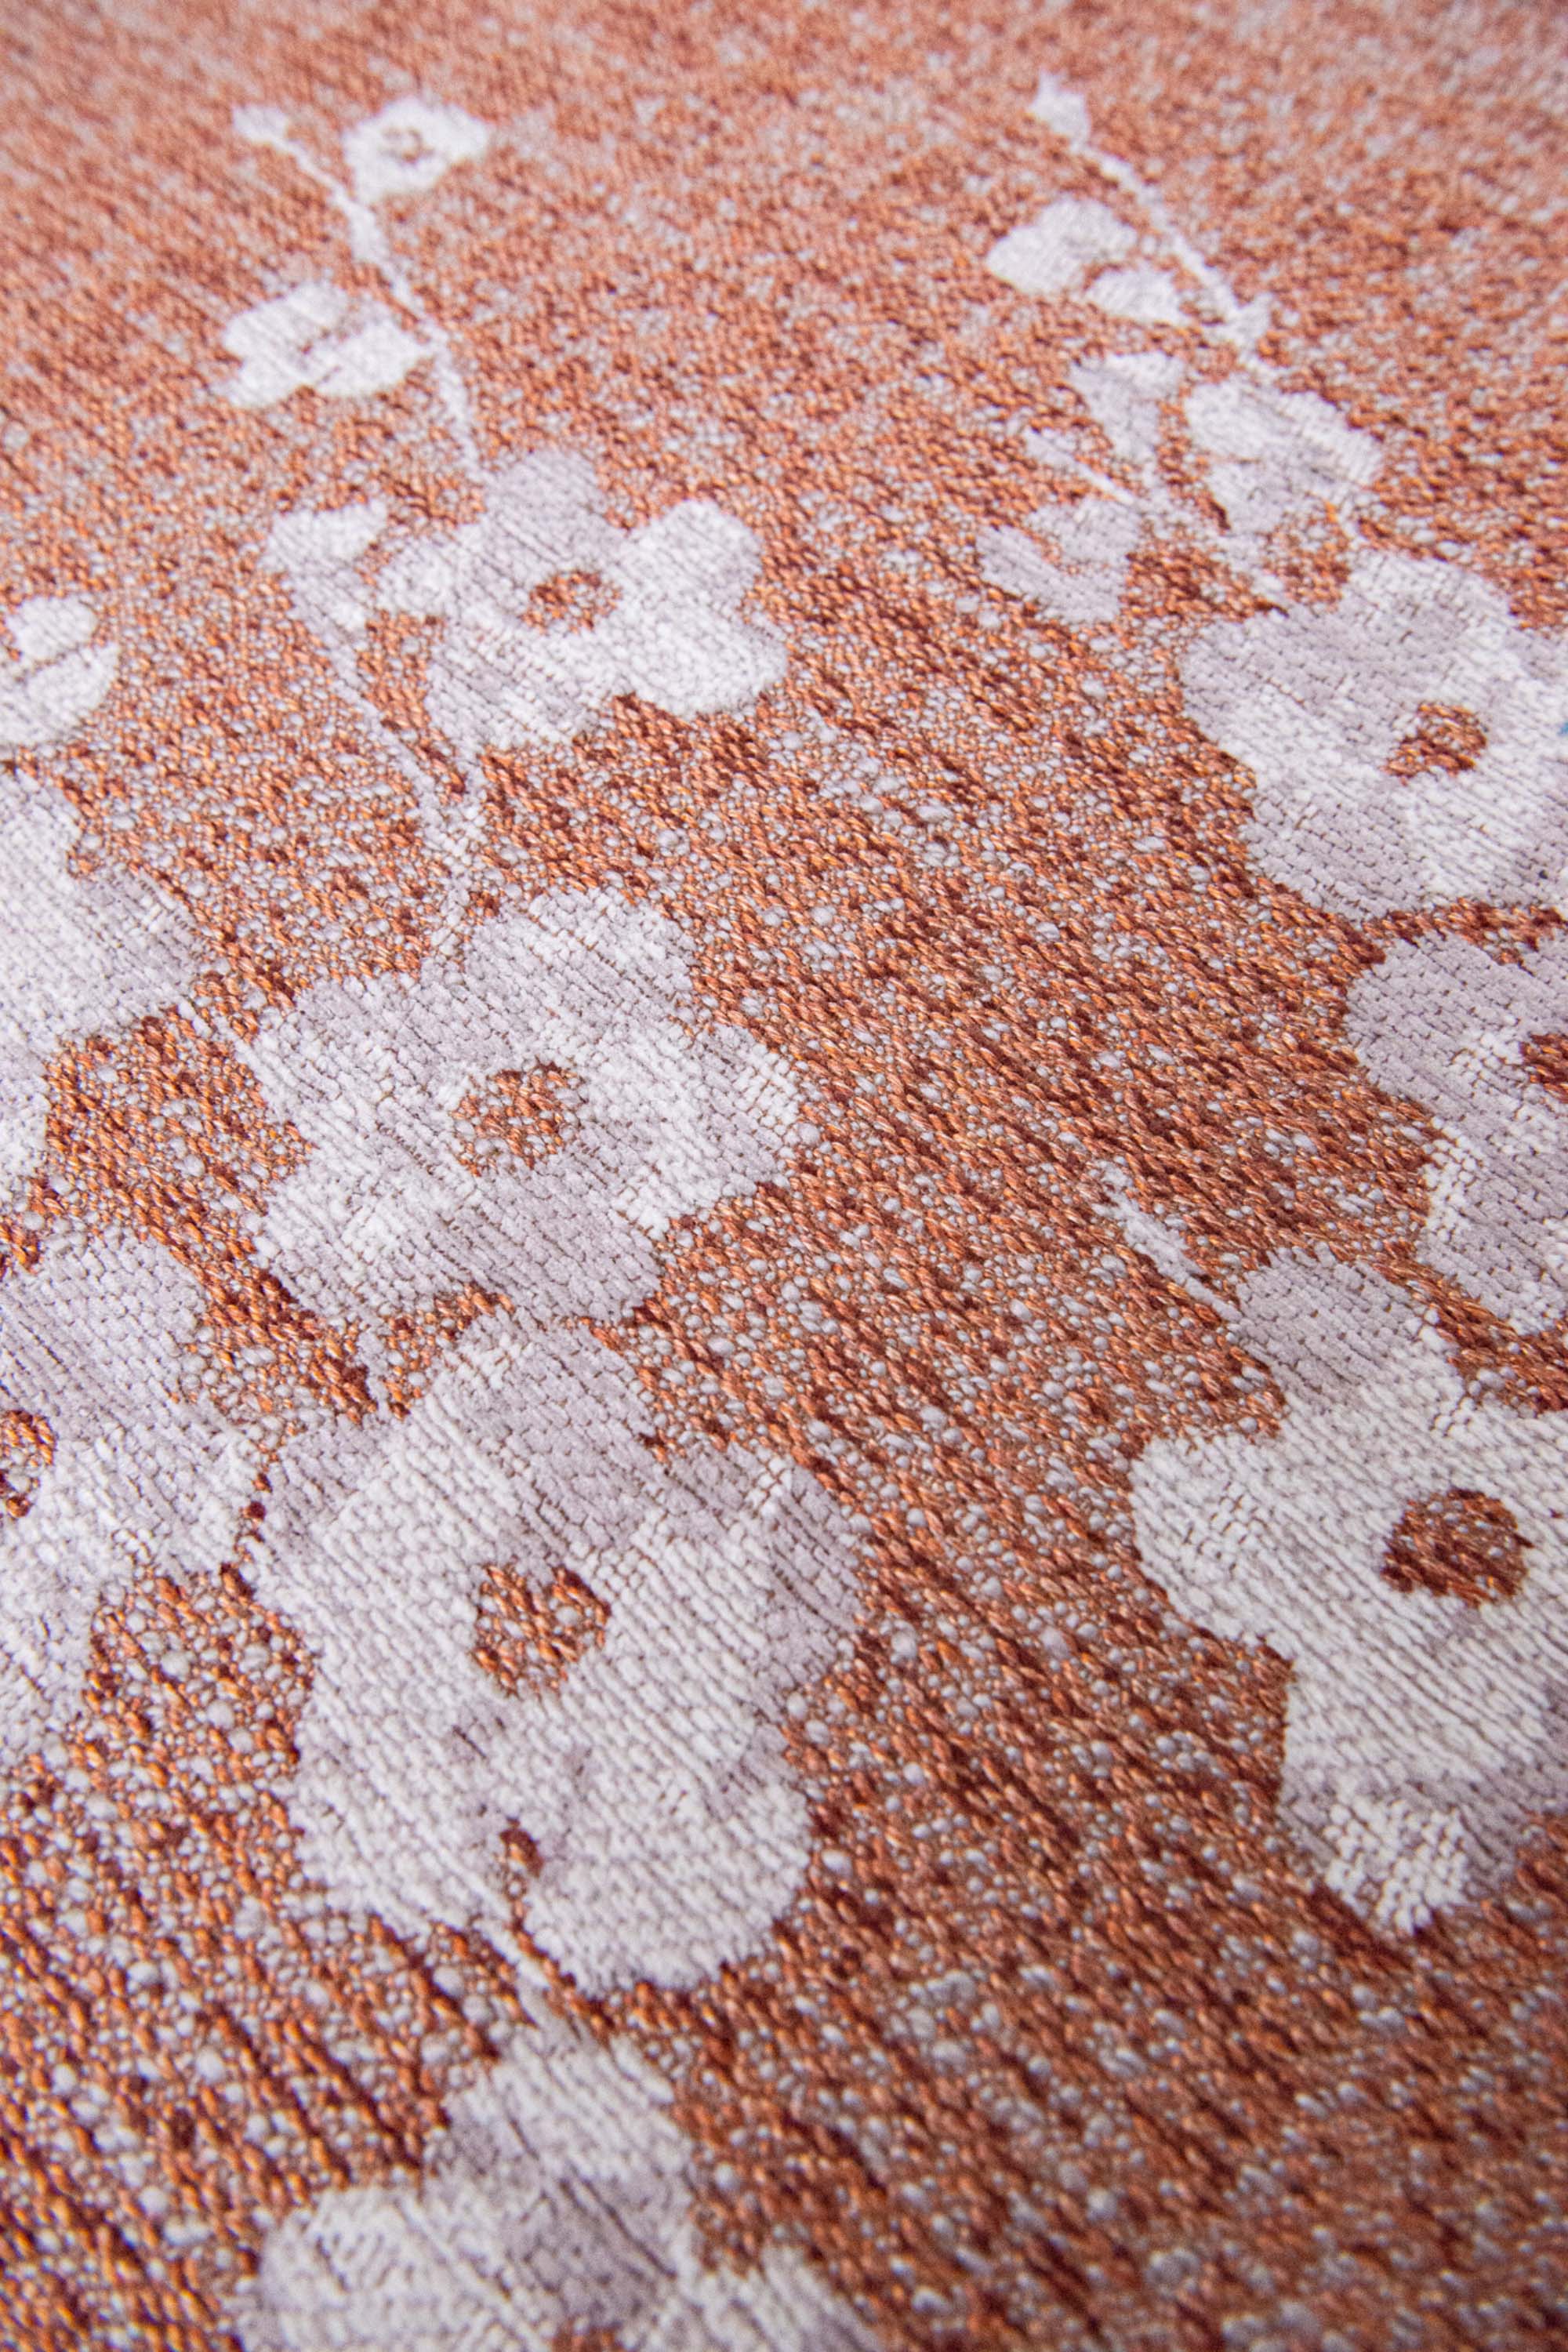 Modern abstract rug with subtle pink floral pattern